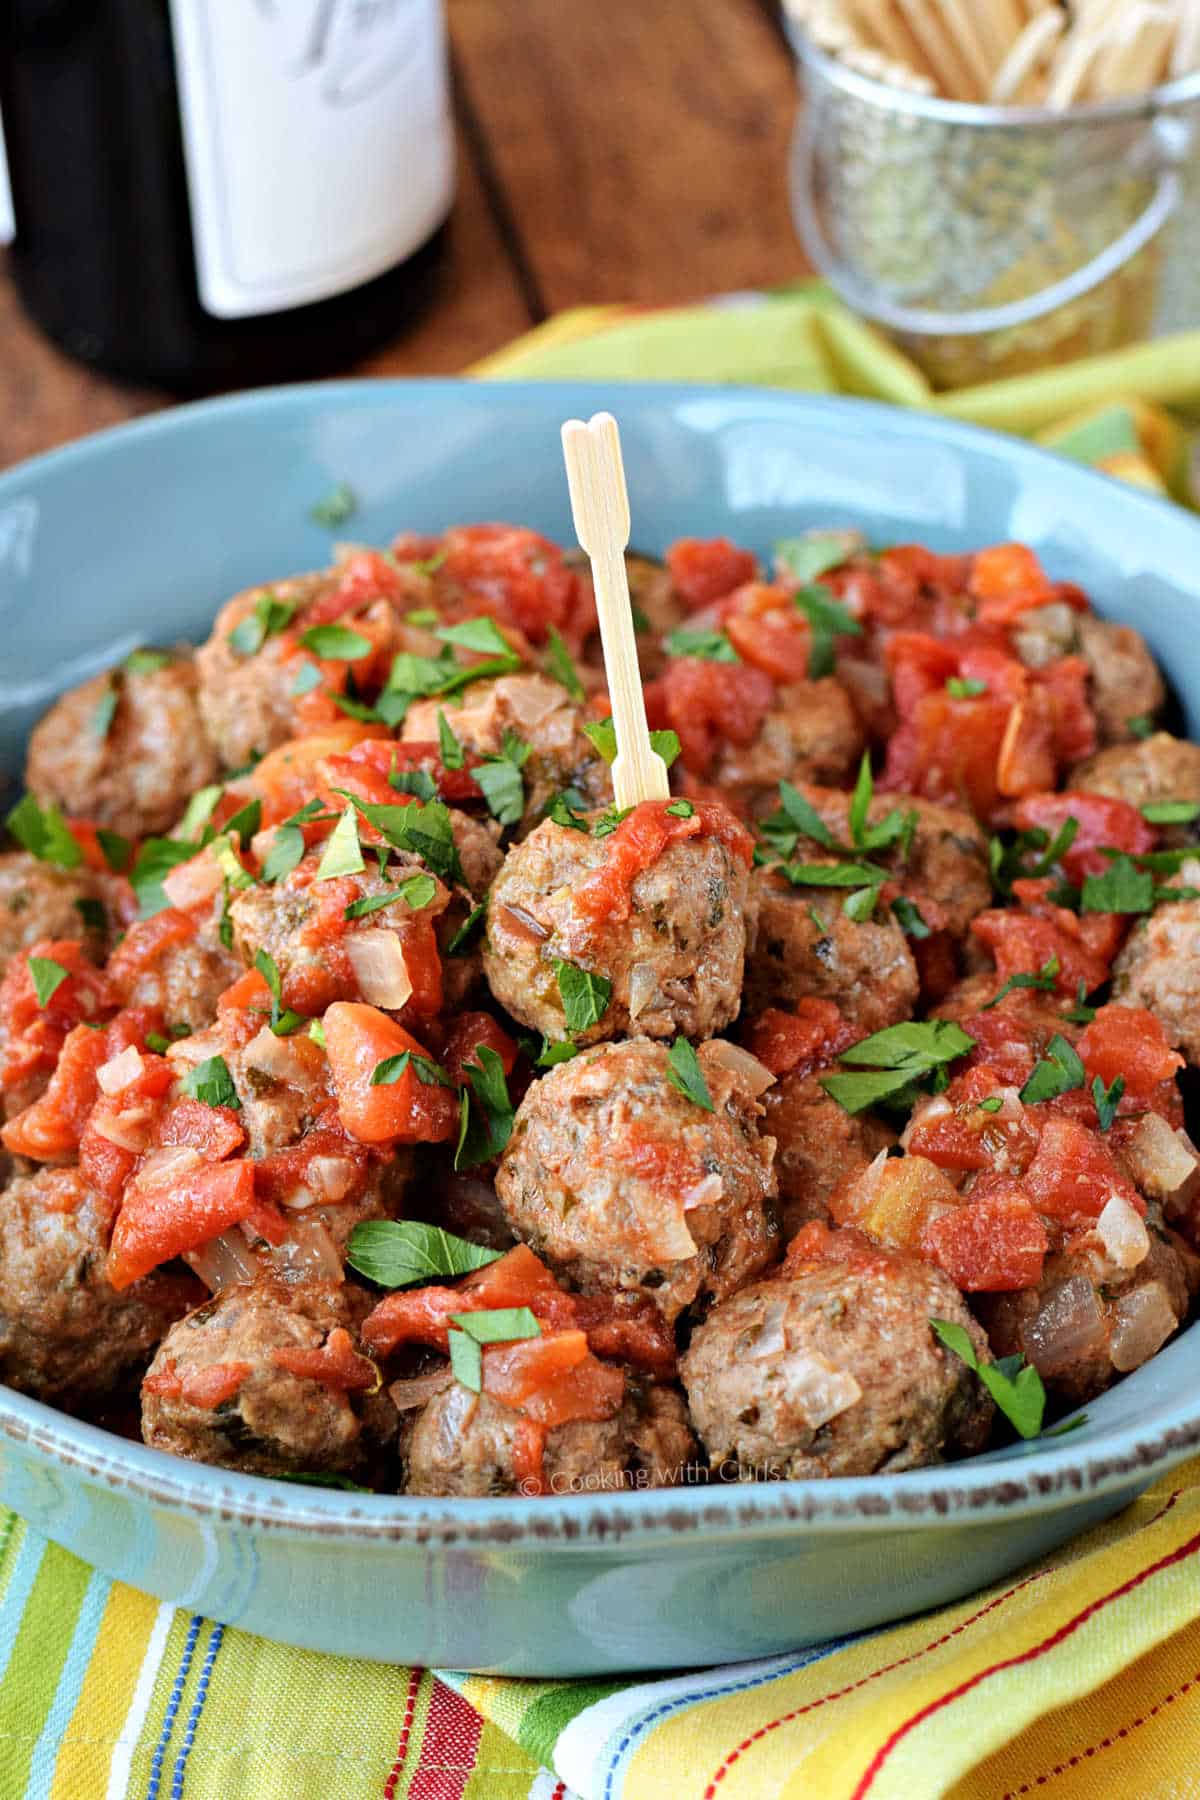 Meatballs in a tomato sauce in a serving bowl.